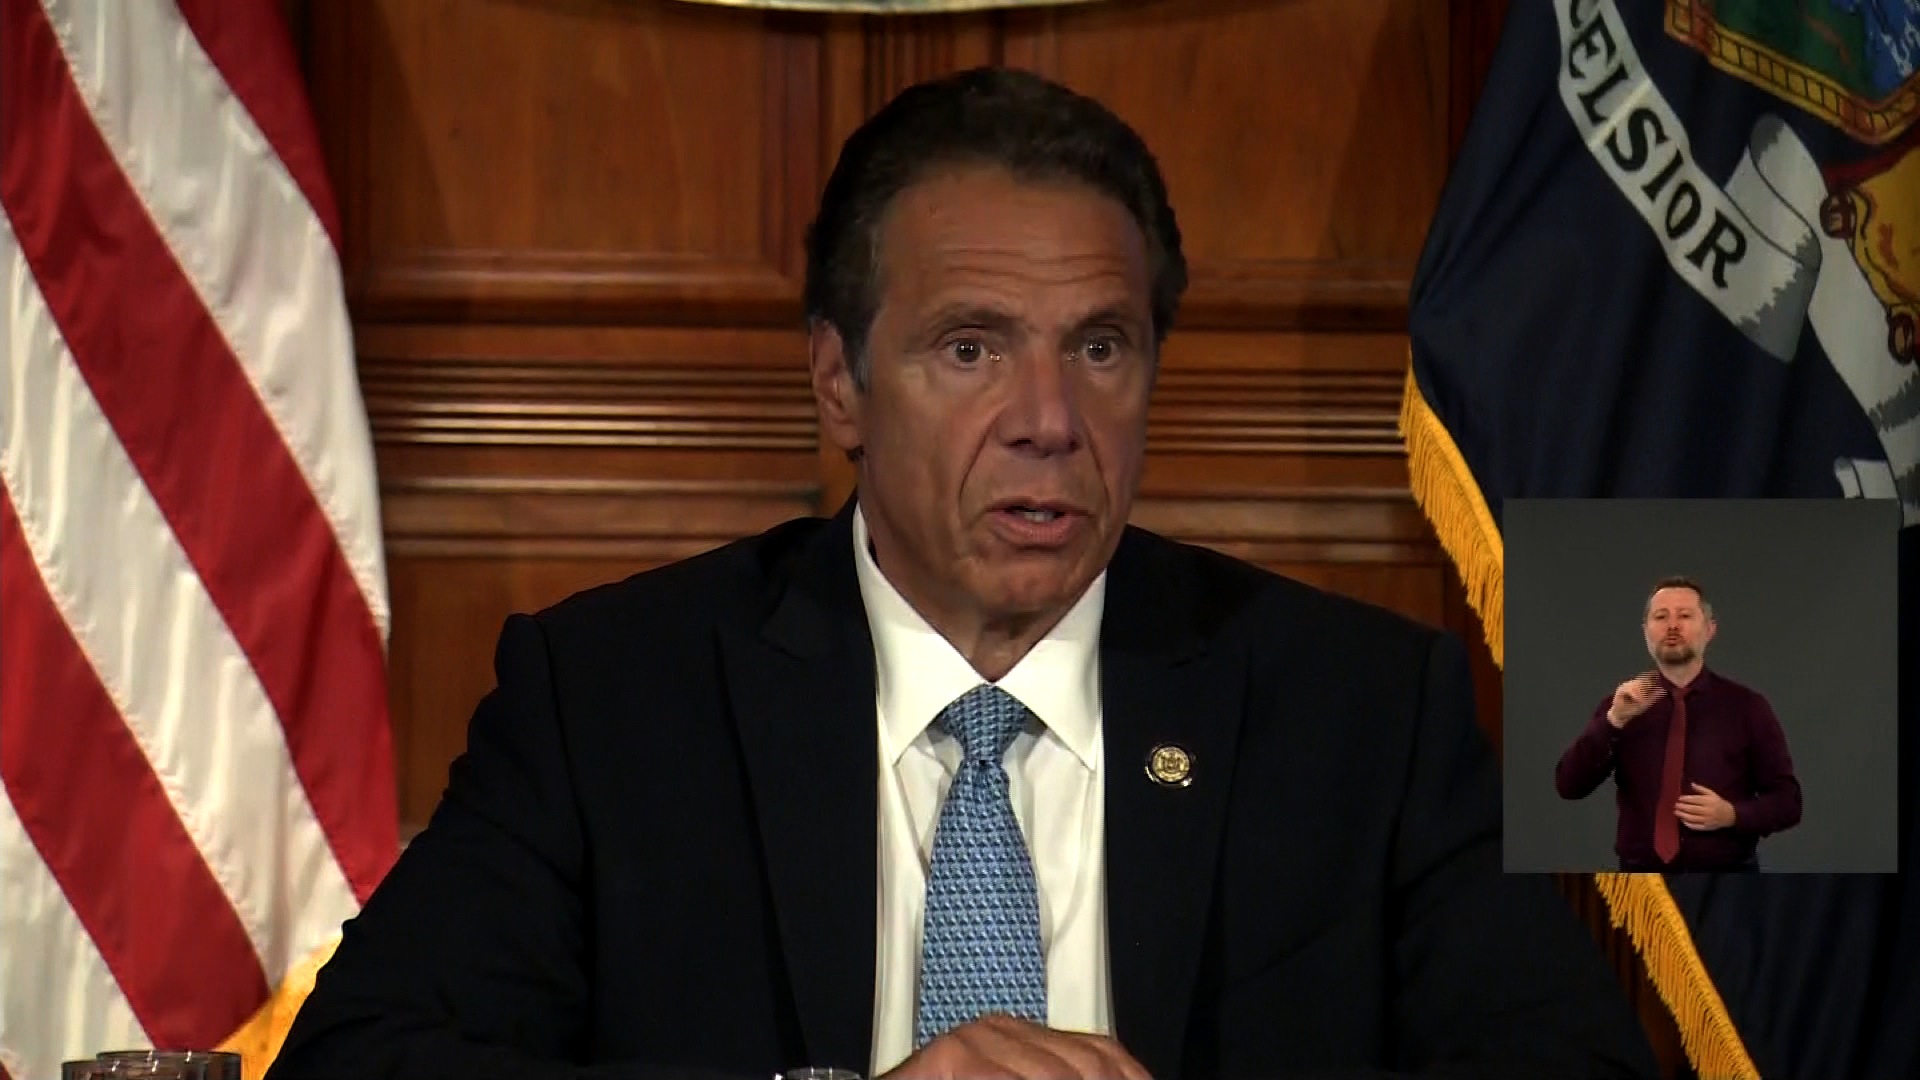 New York Gov. Andrew Cuomo speaks during a press conference in Albany, New York, on June 16.